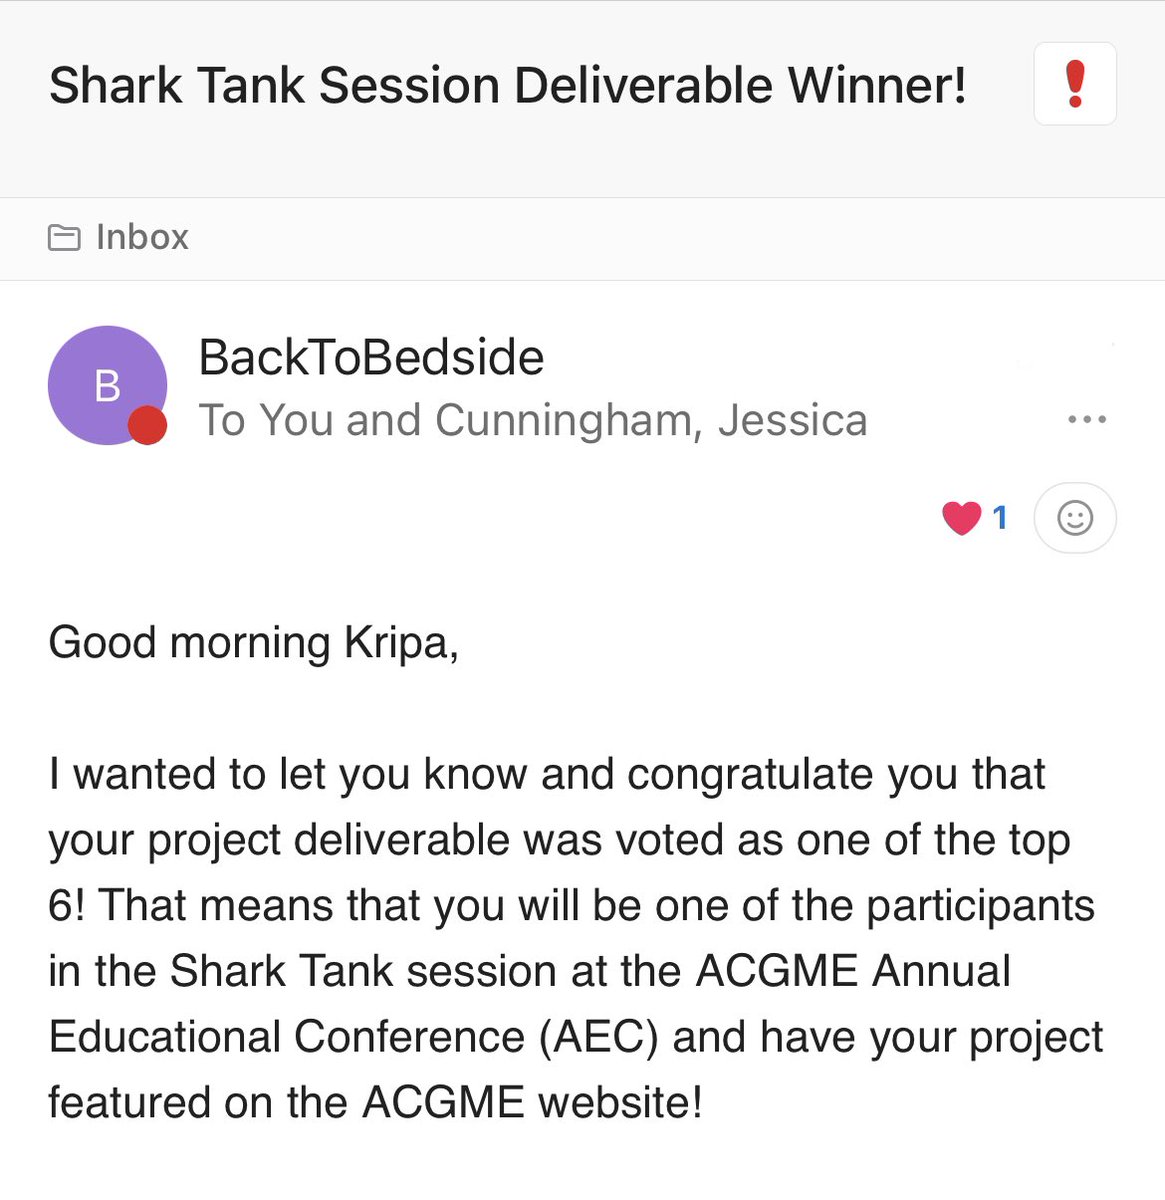 SHARK TANKK!!!
I'm very happy to share that I'll be competing in the Innovative Projects to Get Residents/Fellows Back to Bedside: A “Shark Tank” Competition at ACGME Annual Educational Conference in Orlando, Florida on March 9 2024. @UPMC_RFAC @UPMC @acgme @WomenAs1 #ACGME2024